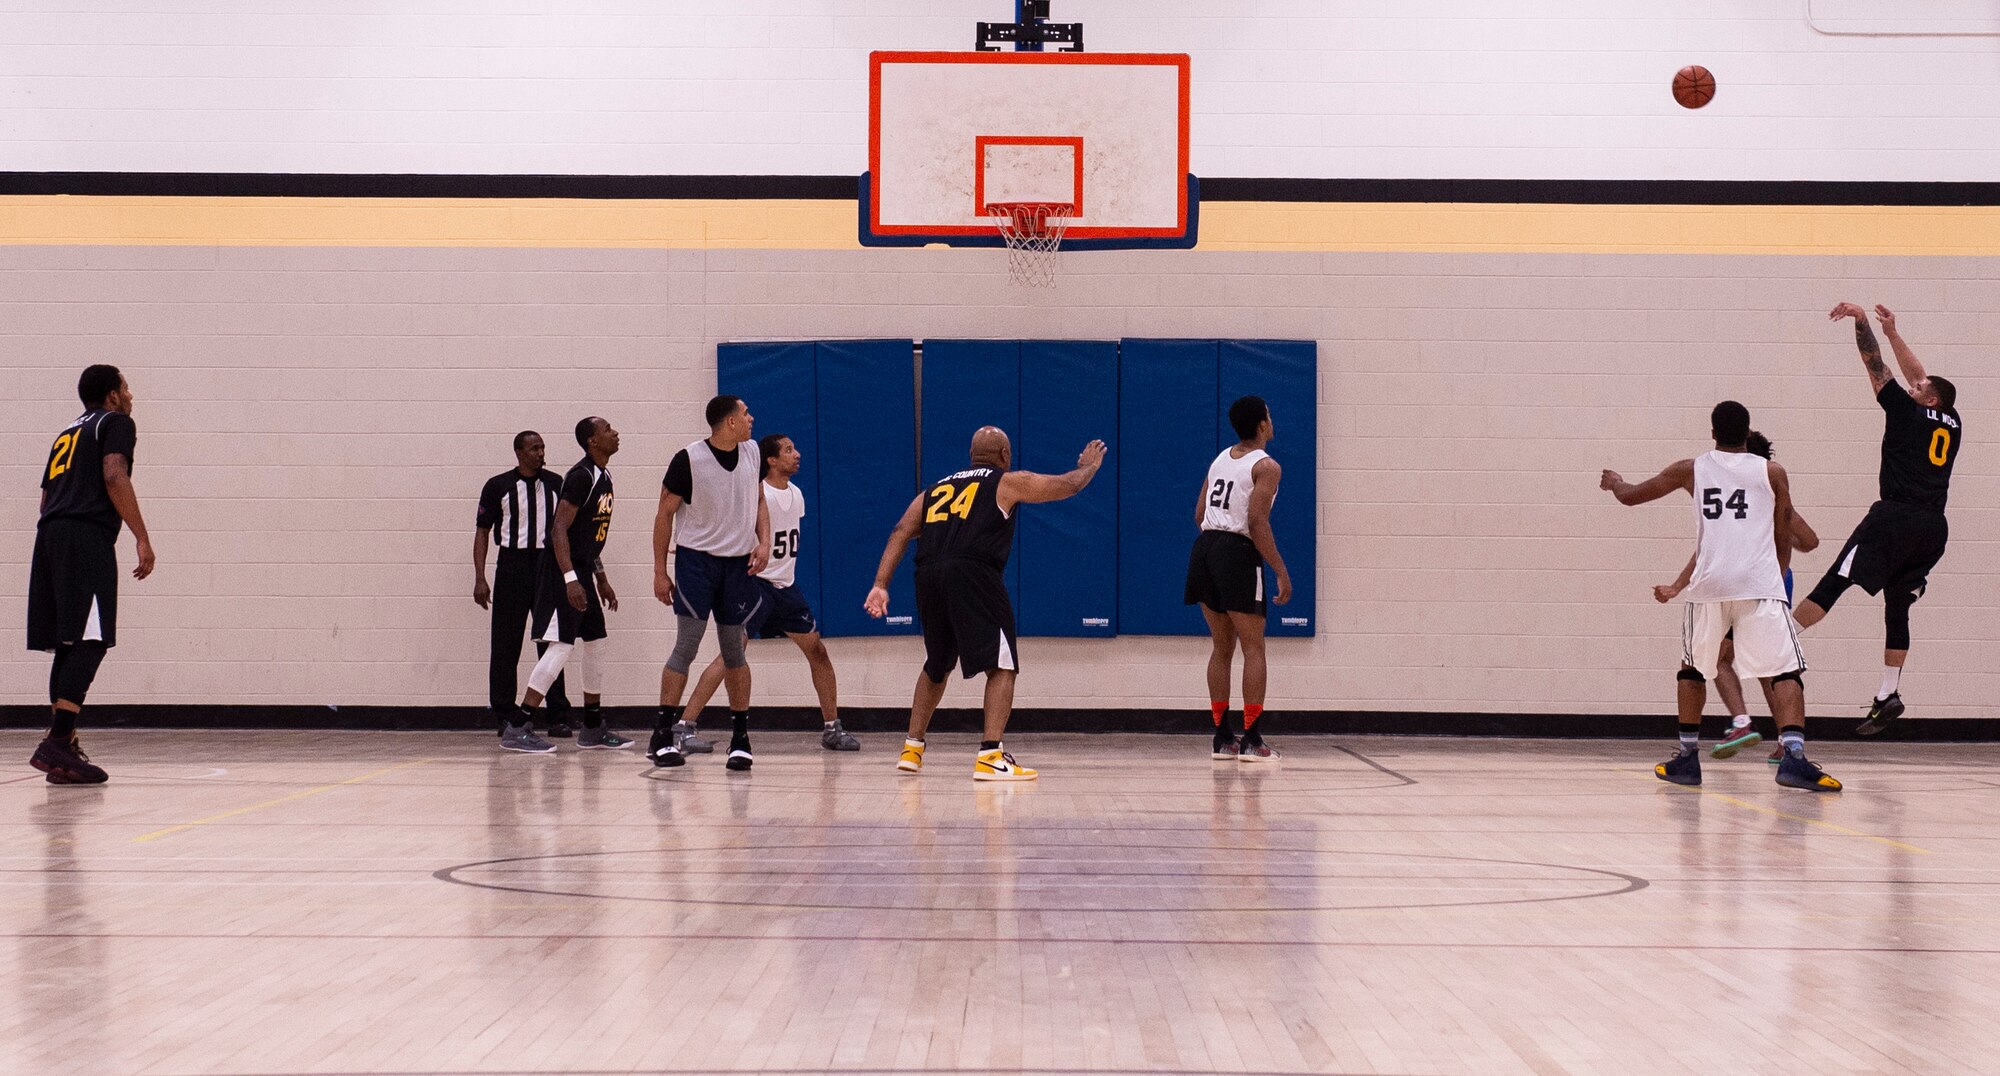 U.S. Airmen assigned to the 20th Equipment Maintenance Squadron aerospace ground equipment flight play against U.S. Soldiers assigned to U.S. Army Central Command during an intramural basketball championship game at Shaw Air Force Base, S.C., March 14, 2019.